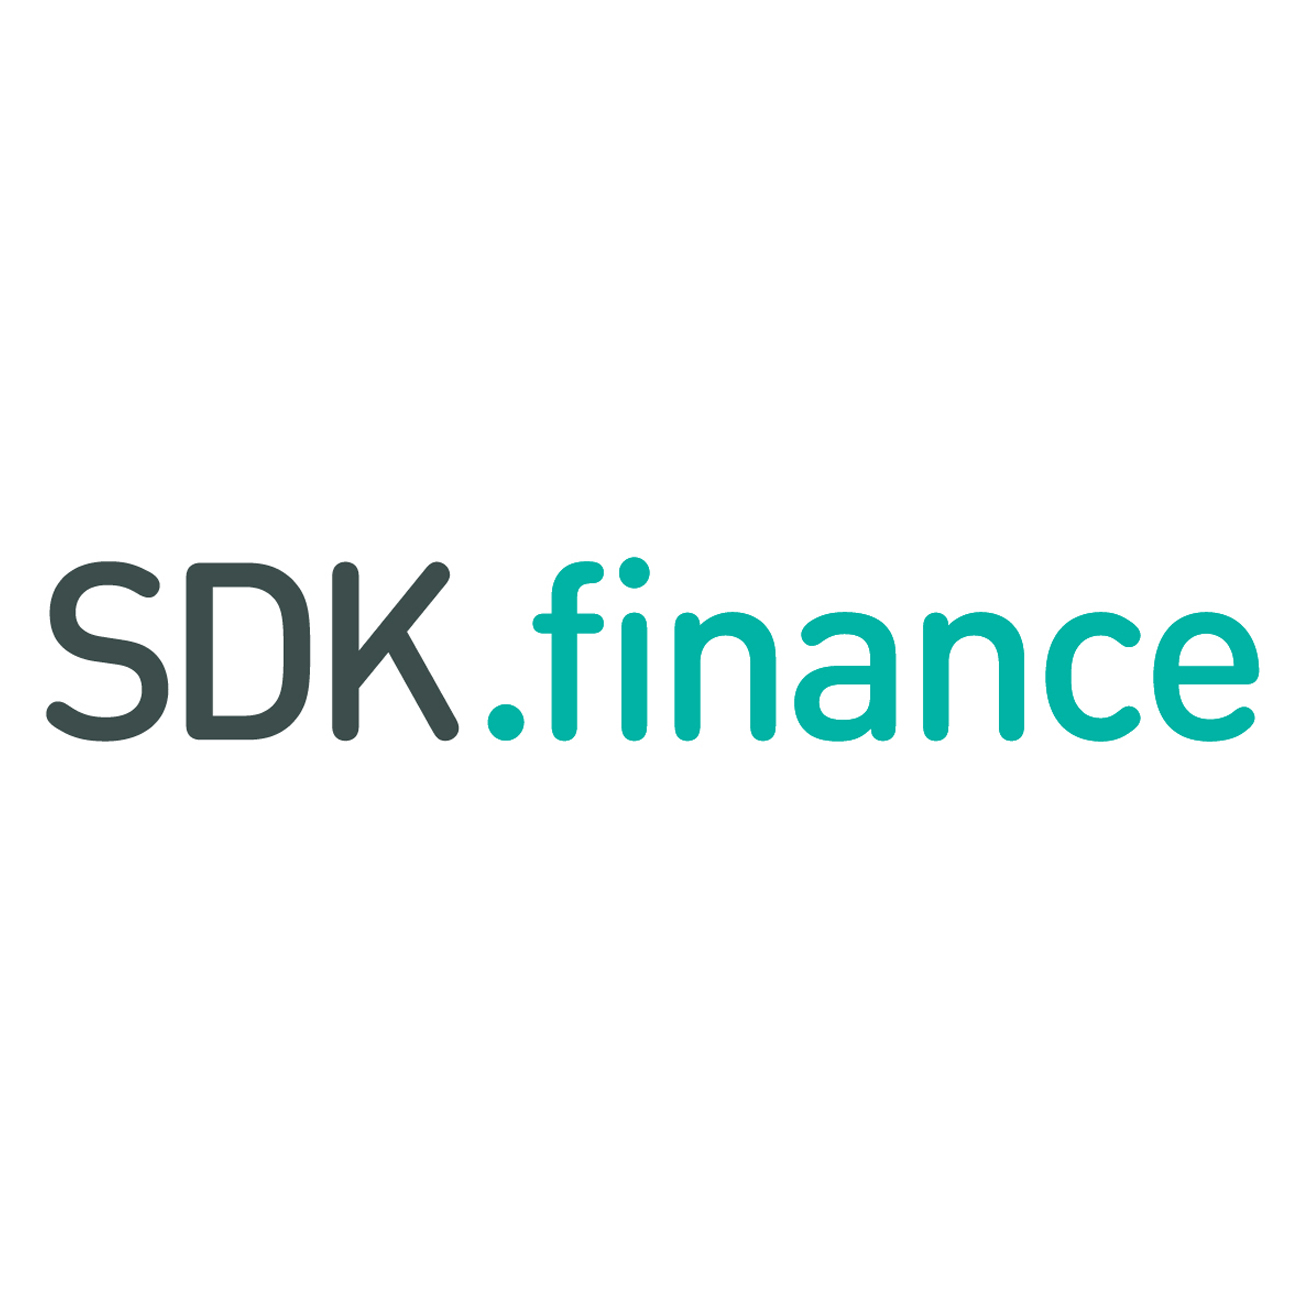 SDK.finance Presents the Solution to the Late Invoice Payments Problem at ING’s Hackathon